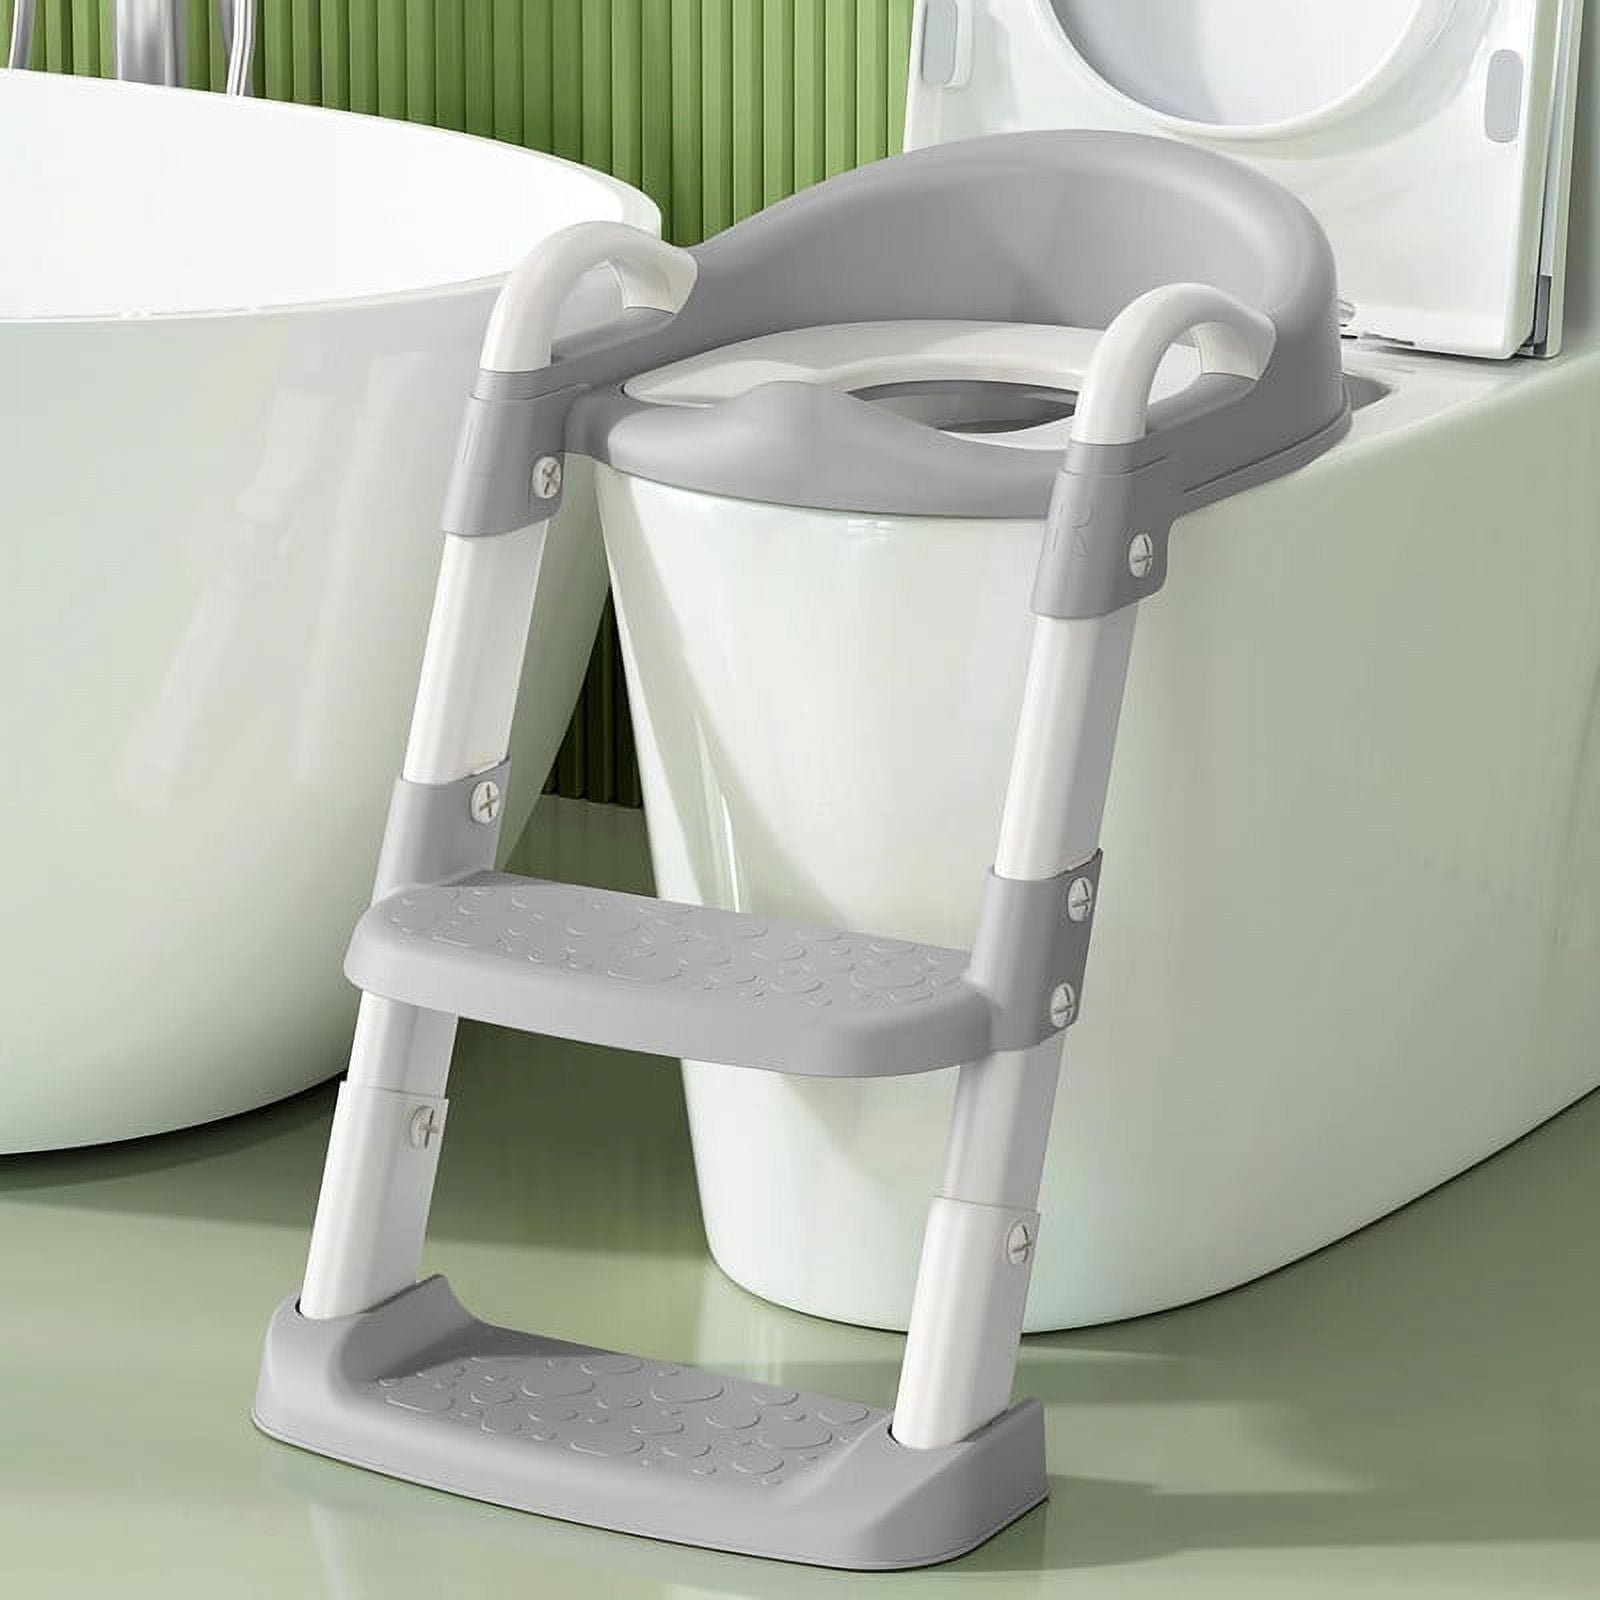 Baby Potty Training Seat Foldable Potty Toilet Seat With Ladders Steps